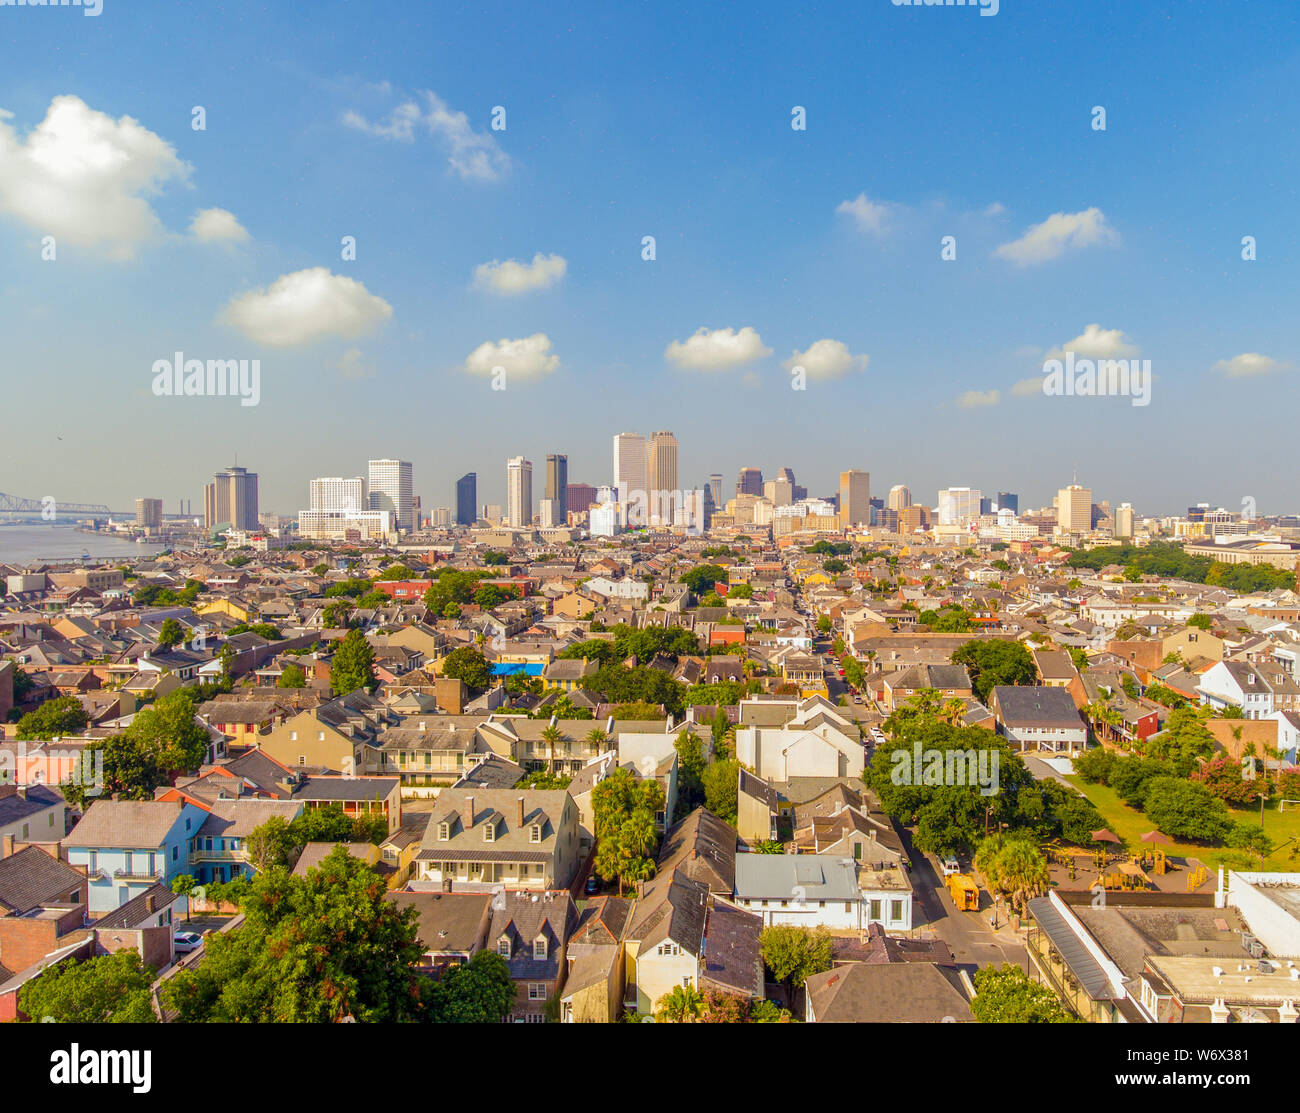 In downtown New Orleans, Louisiana Foto Stock